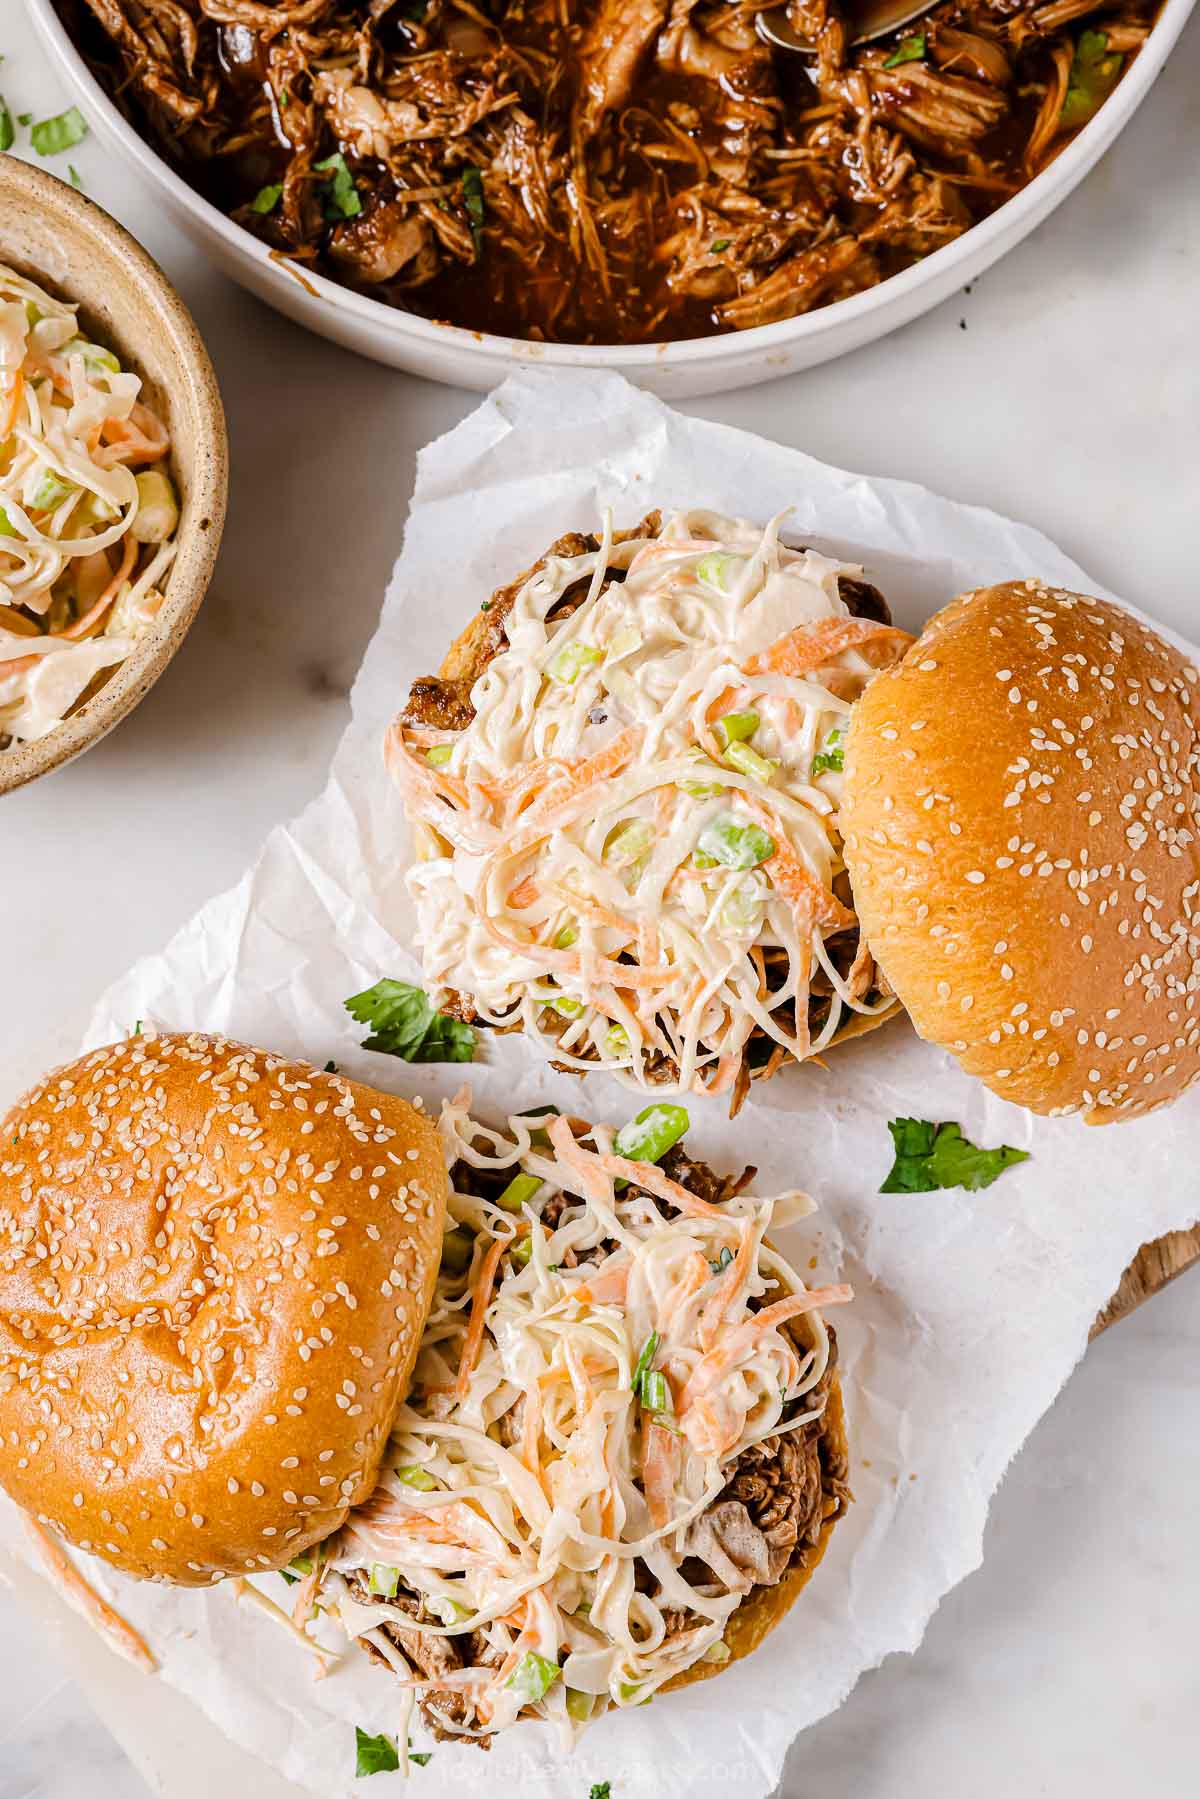 Pulled pork sliders with creamy slaw.